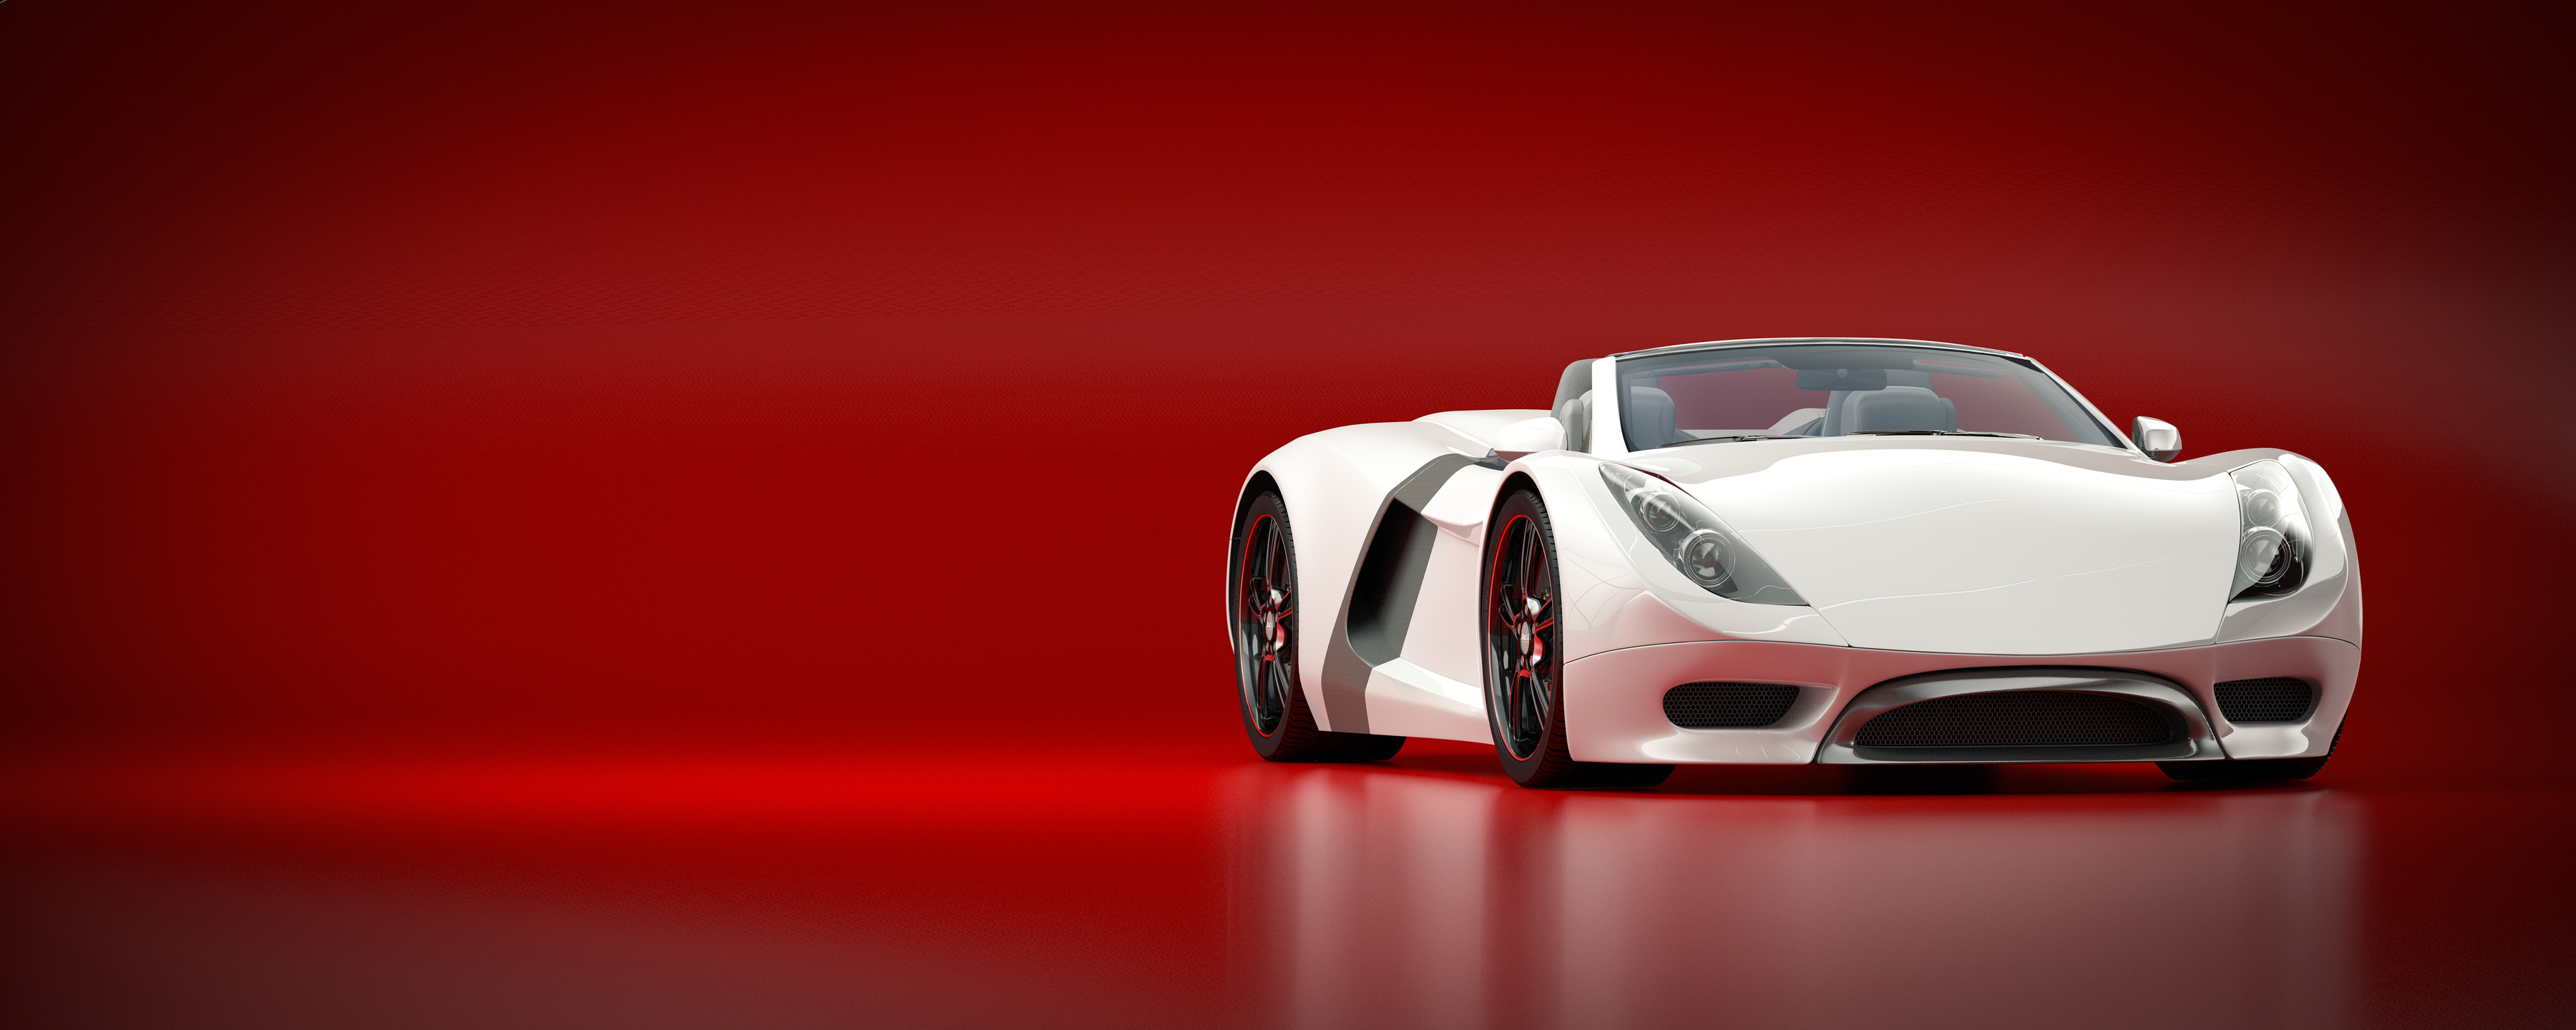 White Sports Car on a Red Background